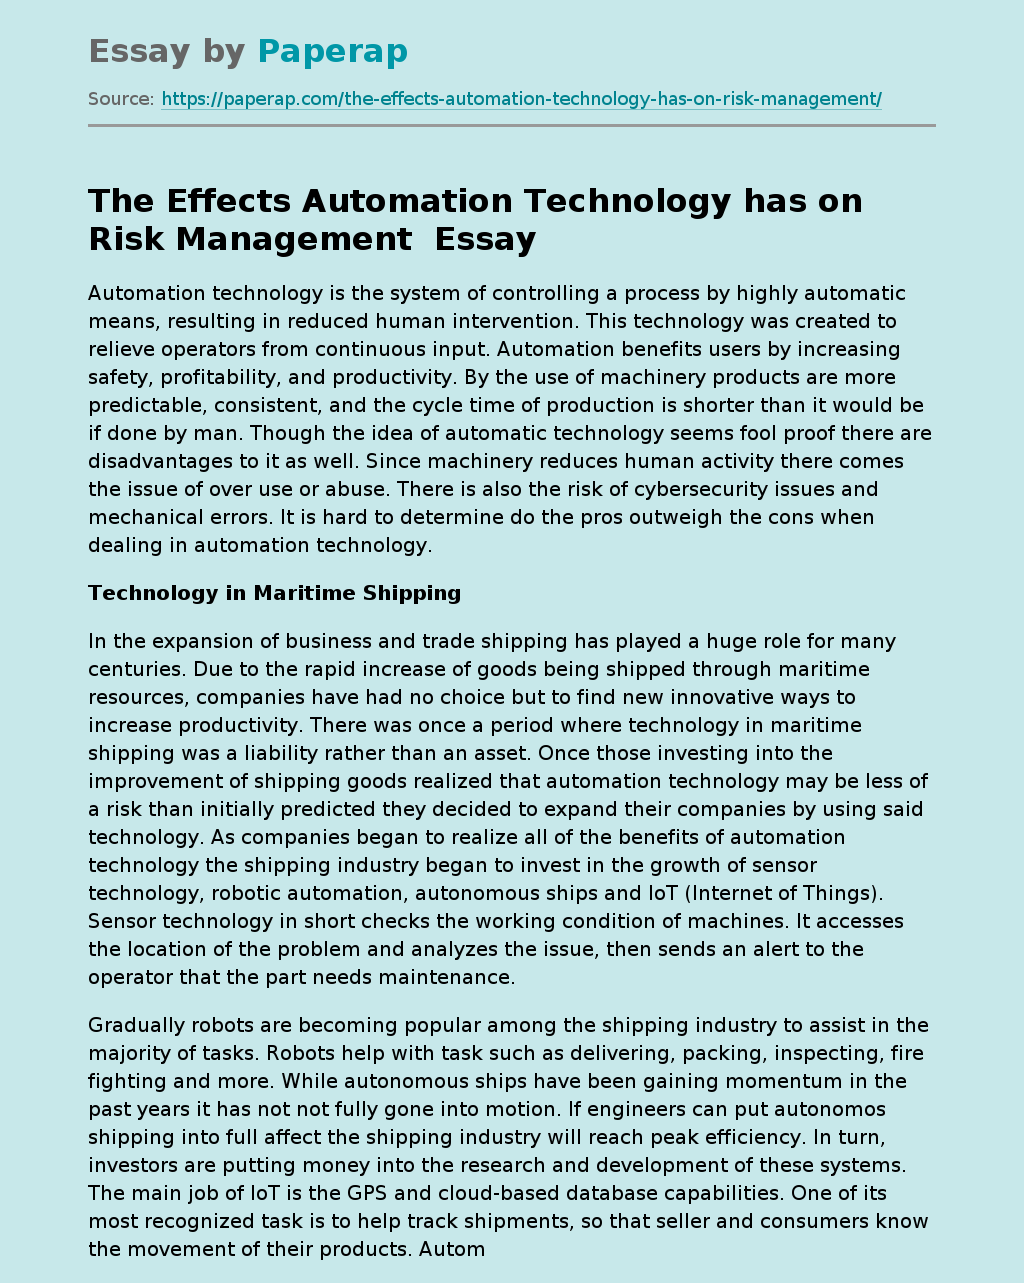 The Effects Automation Technology has on Risk Management 